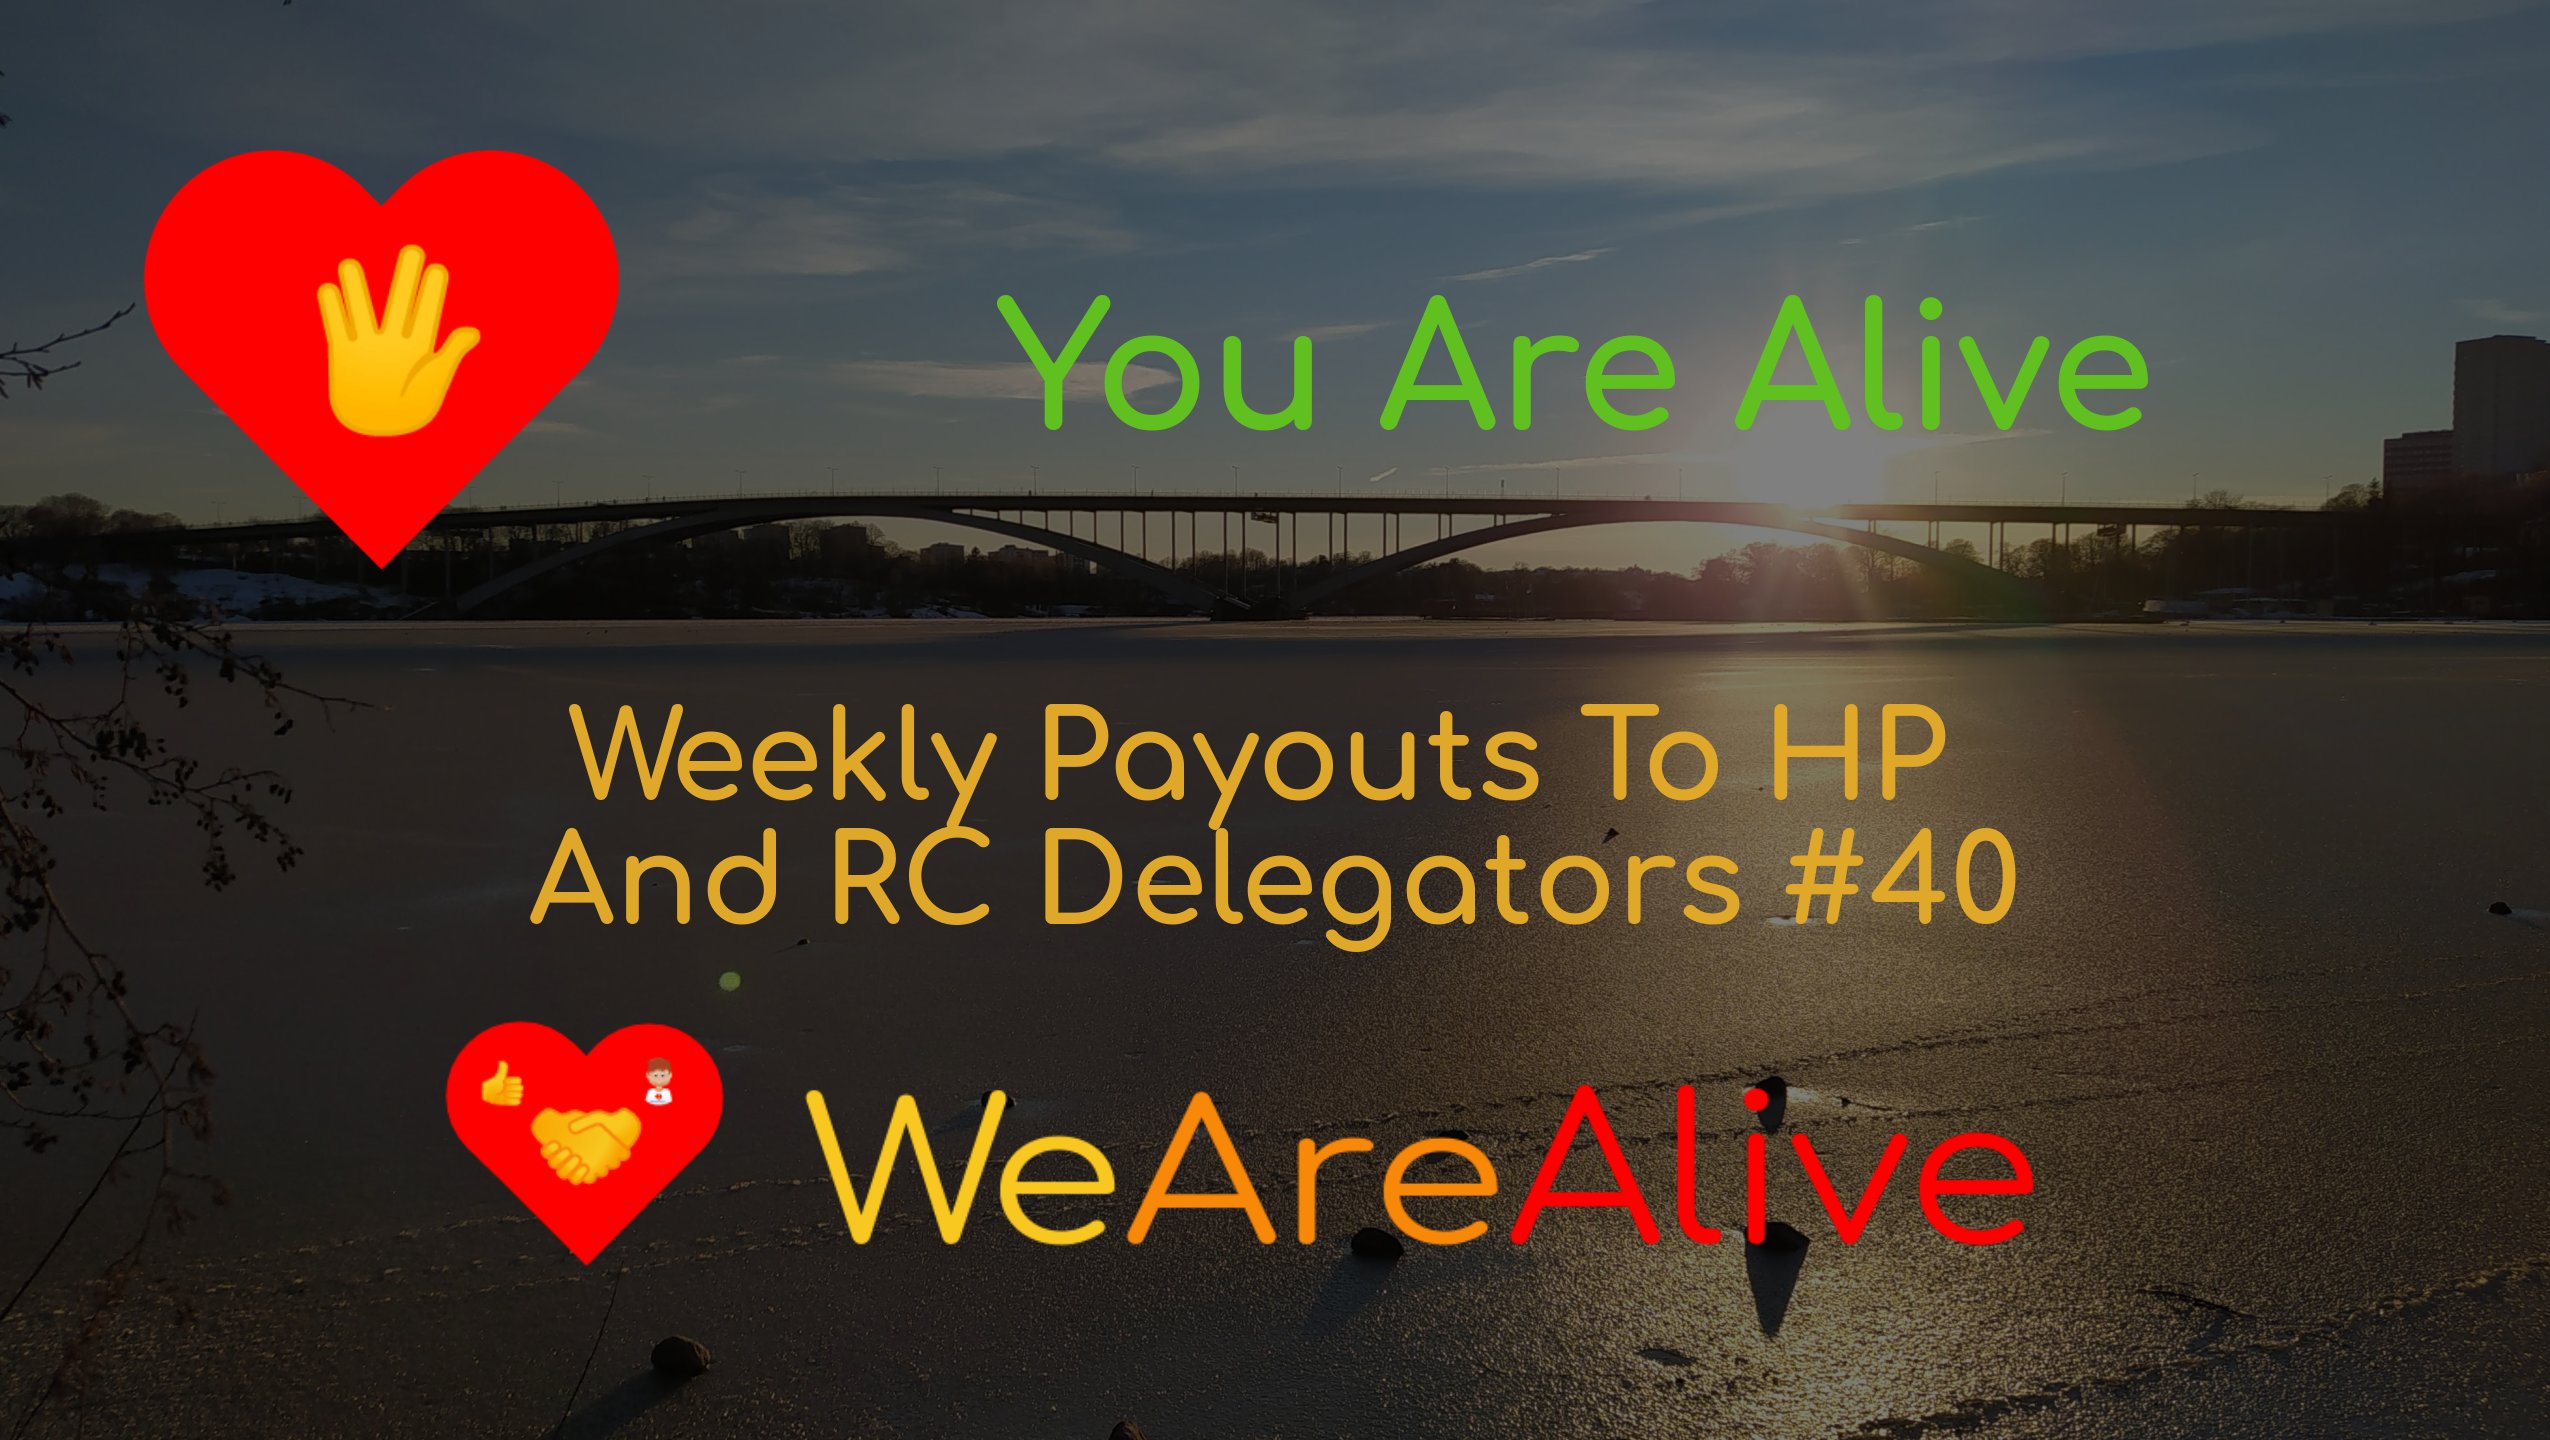 @youarealive/you-are-alive-weekly-payouts-to-hp-and-rc-delegators-40